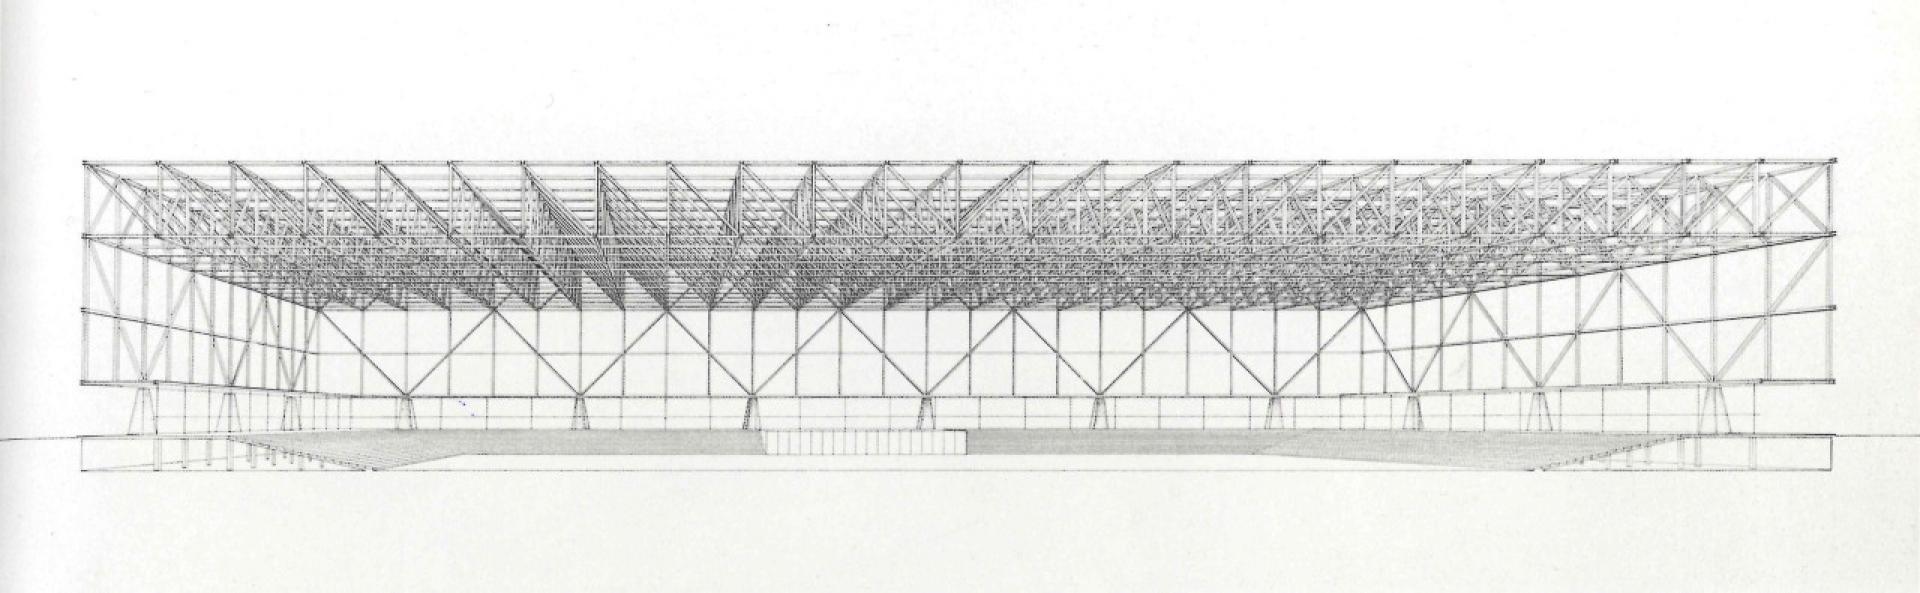 The entire hall of the Chicago Convention Hall Project rests on the peripheral pillars. | Drawing MvdR office, © MoMA, New York, scanned from: Phyllis Lambert, Mies van der Rohe in America, p. 467.